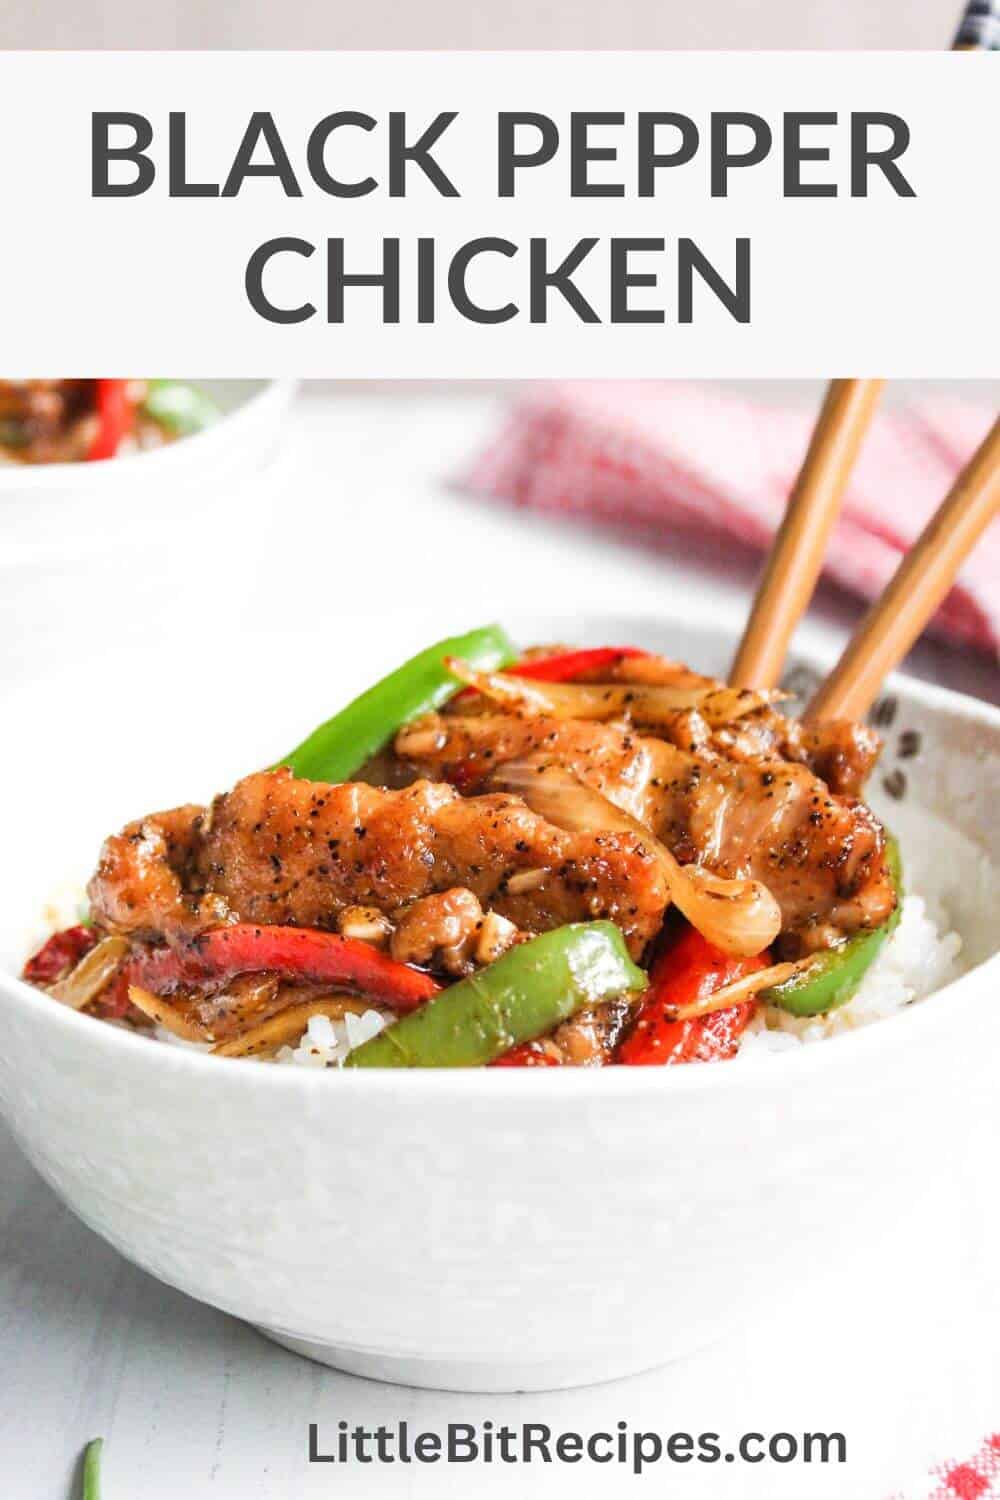 Black pepper chicken with text.